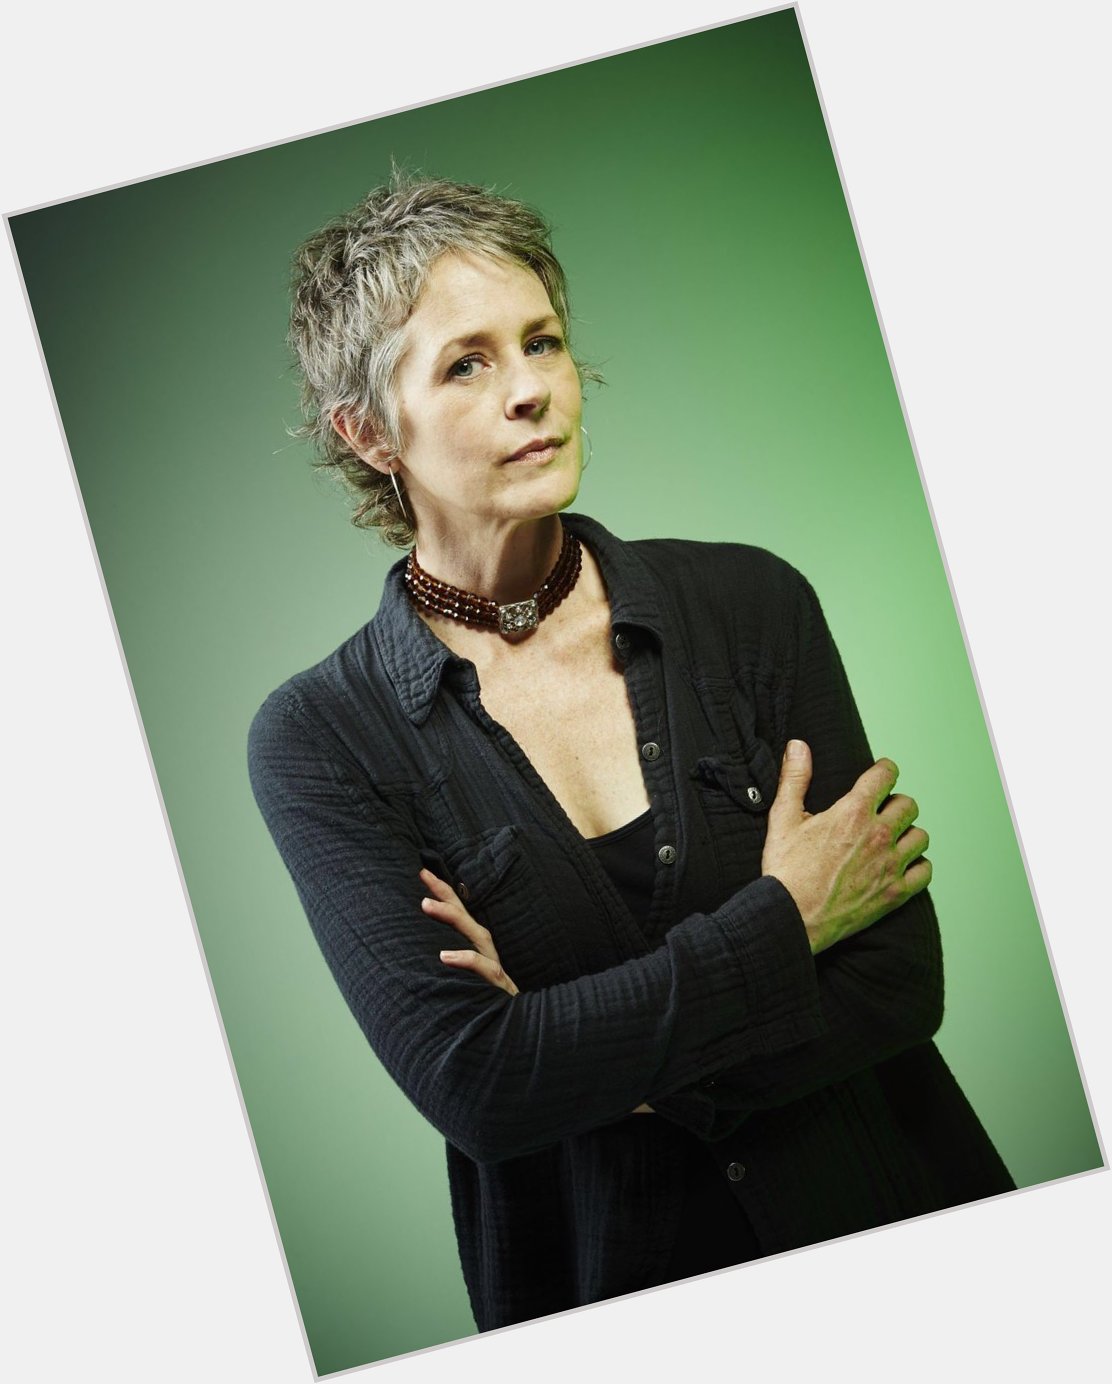 Happy Birthday Melissa McBride. You are an amazing actress. I hope your enjoying your special day.   